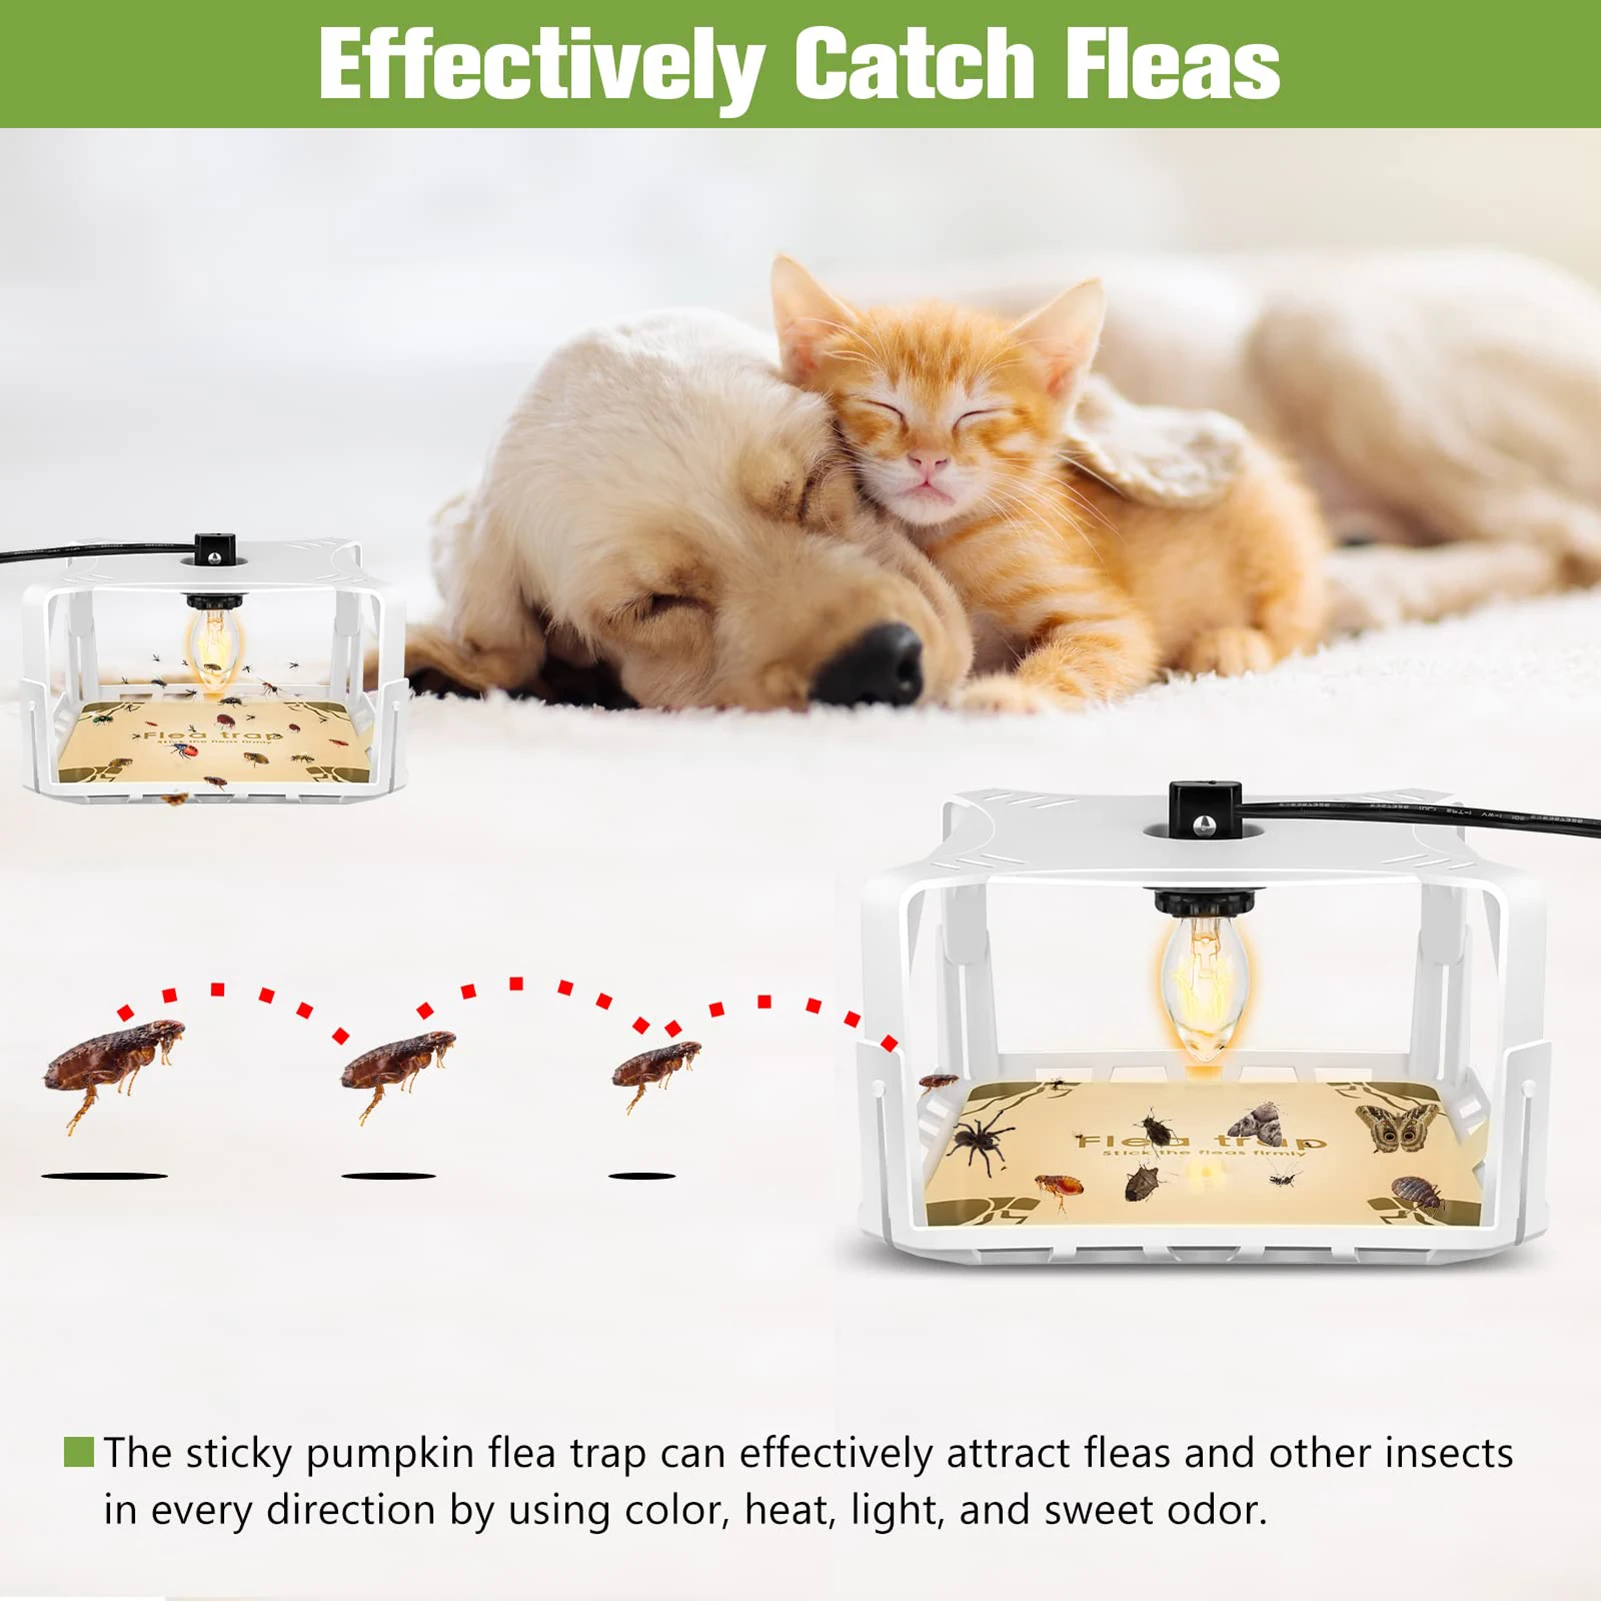 https://ae01.alicdn.com/kf/S7276698334ed4b4ba705e4ca6e76c8f51/Flea-Trap-Lamp-Useful-Simple-Installation-Safe-to-Use-Indoor-Sticky-Flea-Trap-with-LED-Lamp.jpg